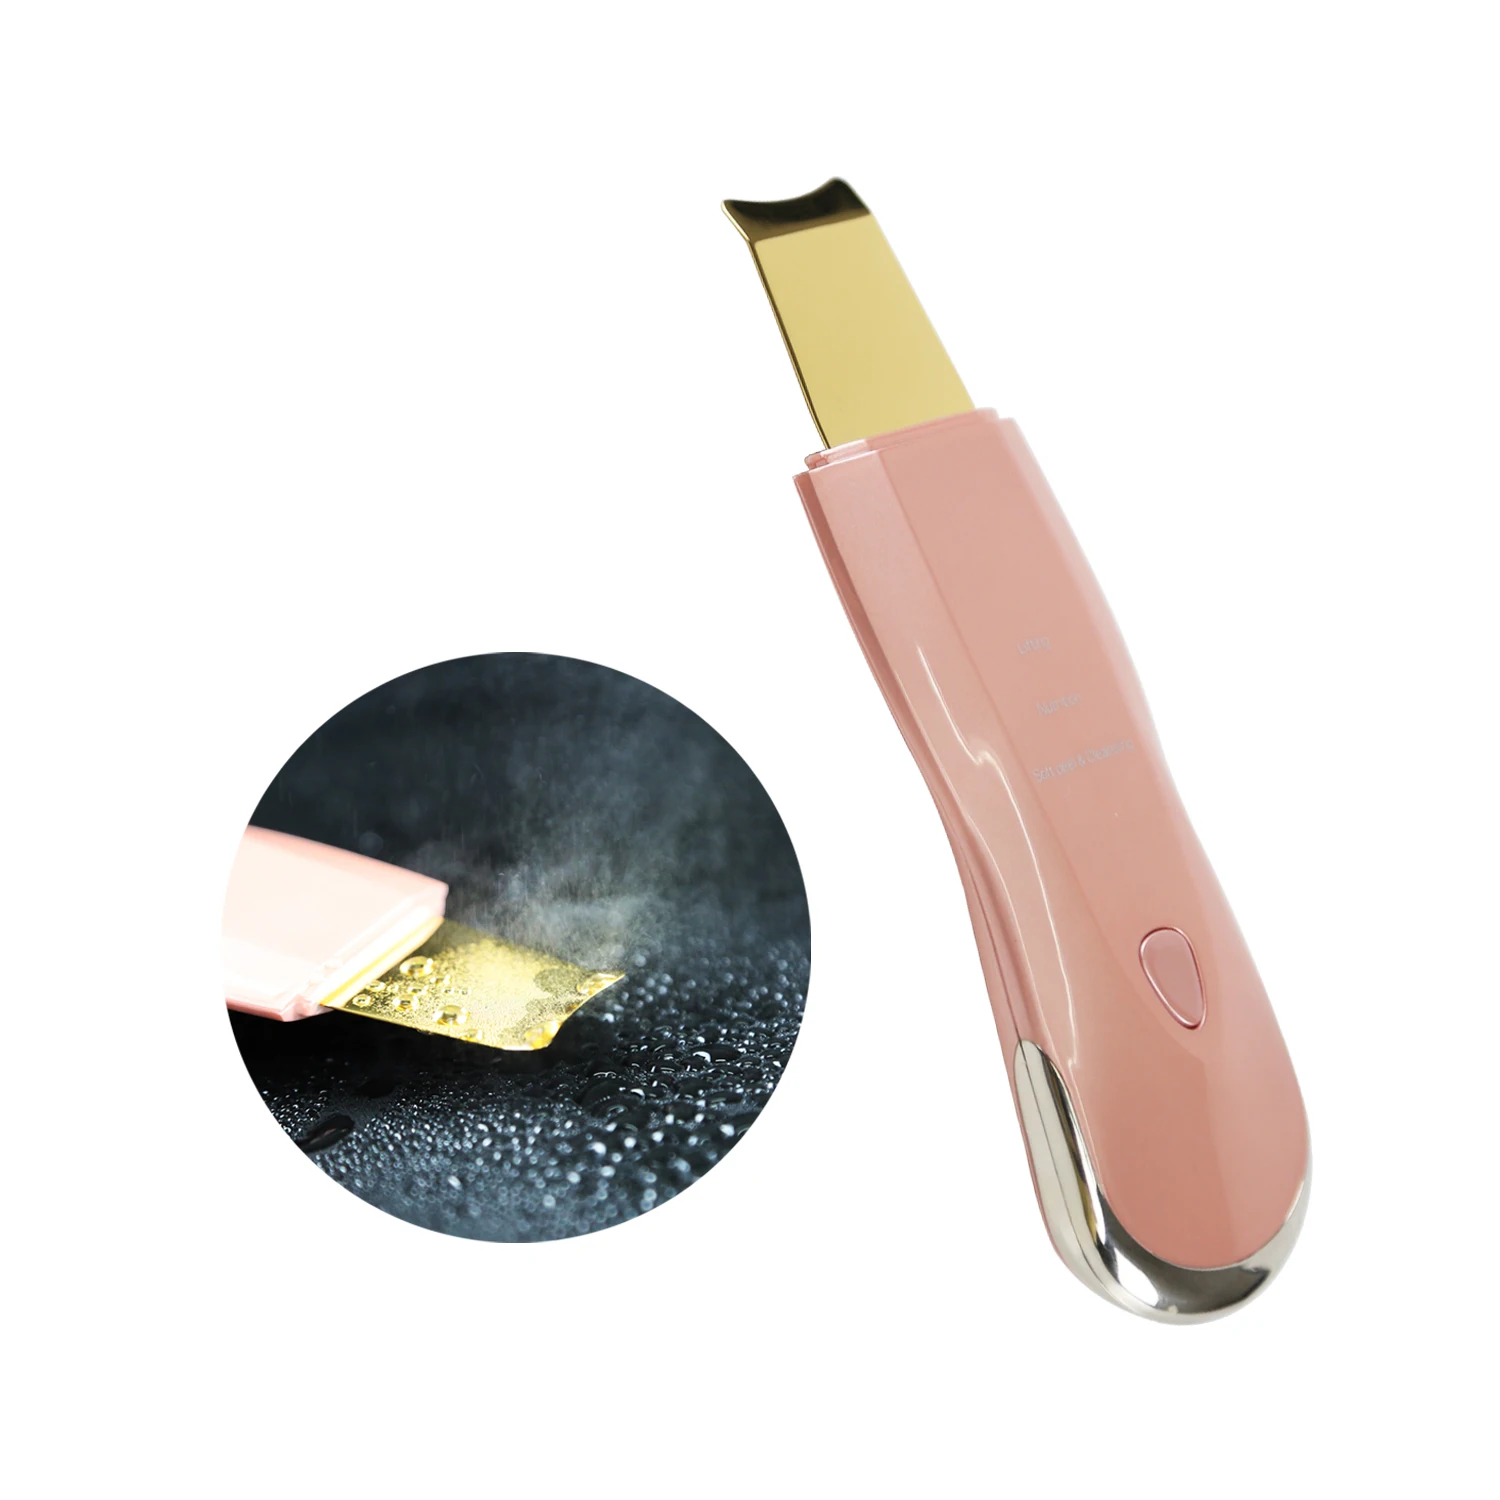 

Factory Direct Price Microcurrent Sonic Ultrasonic Facial Tools Skin Scrubber Remove Dead Skin Ultrasonic Facial Skin Scrubber, Rose gold/black/pink/white or customization